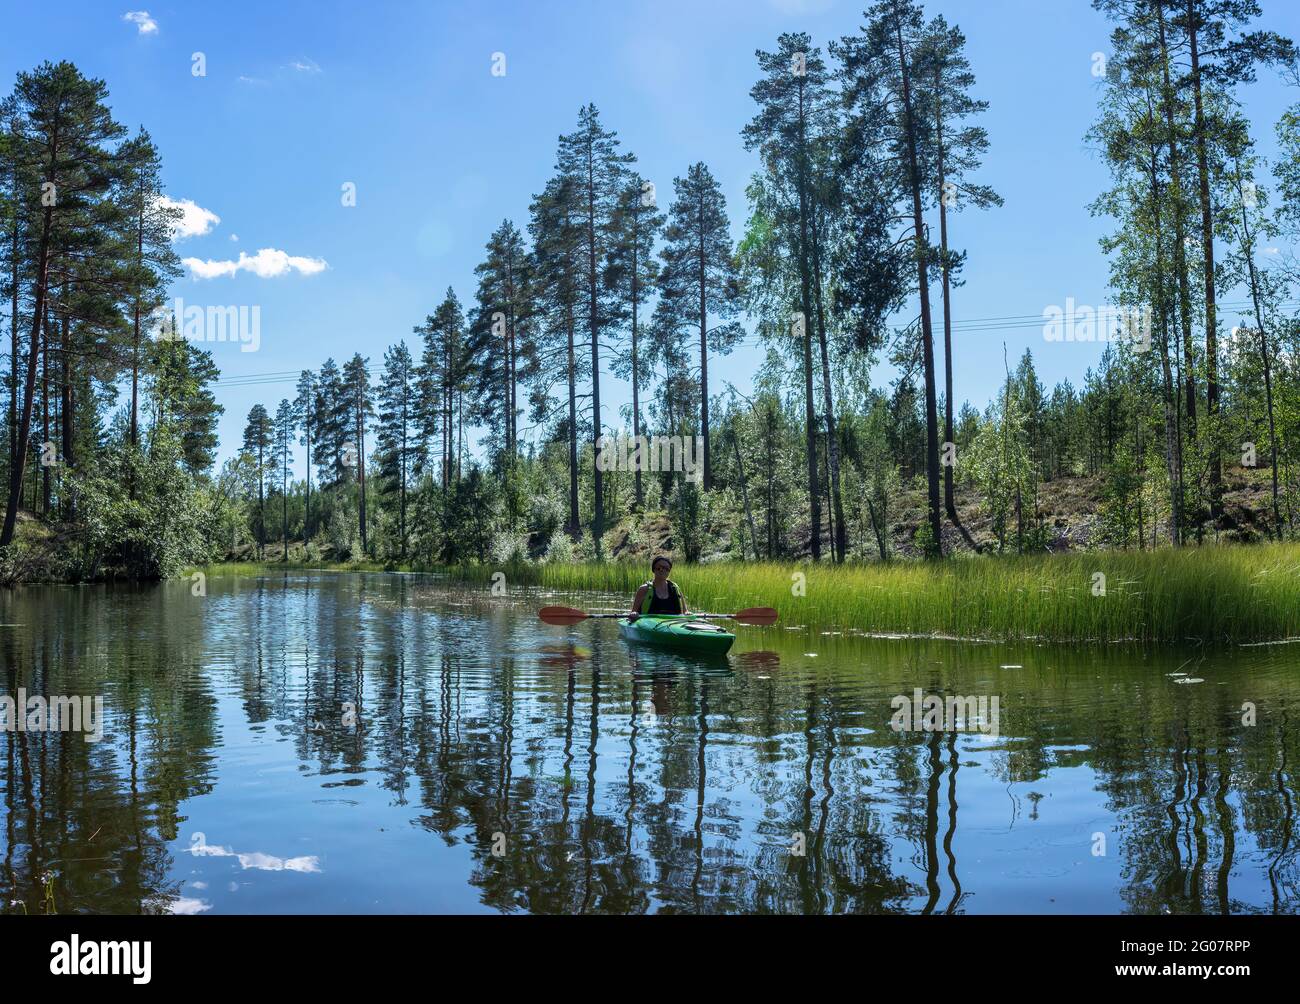 Middle age Caucasian Scandinavian women in kayak lifted the paddles and rests after kayaking in small river in forest. Northern Sweden, Tavelsjo lake, Stock Photo